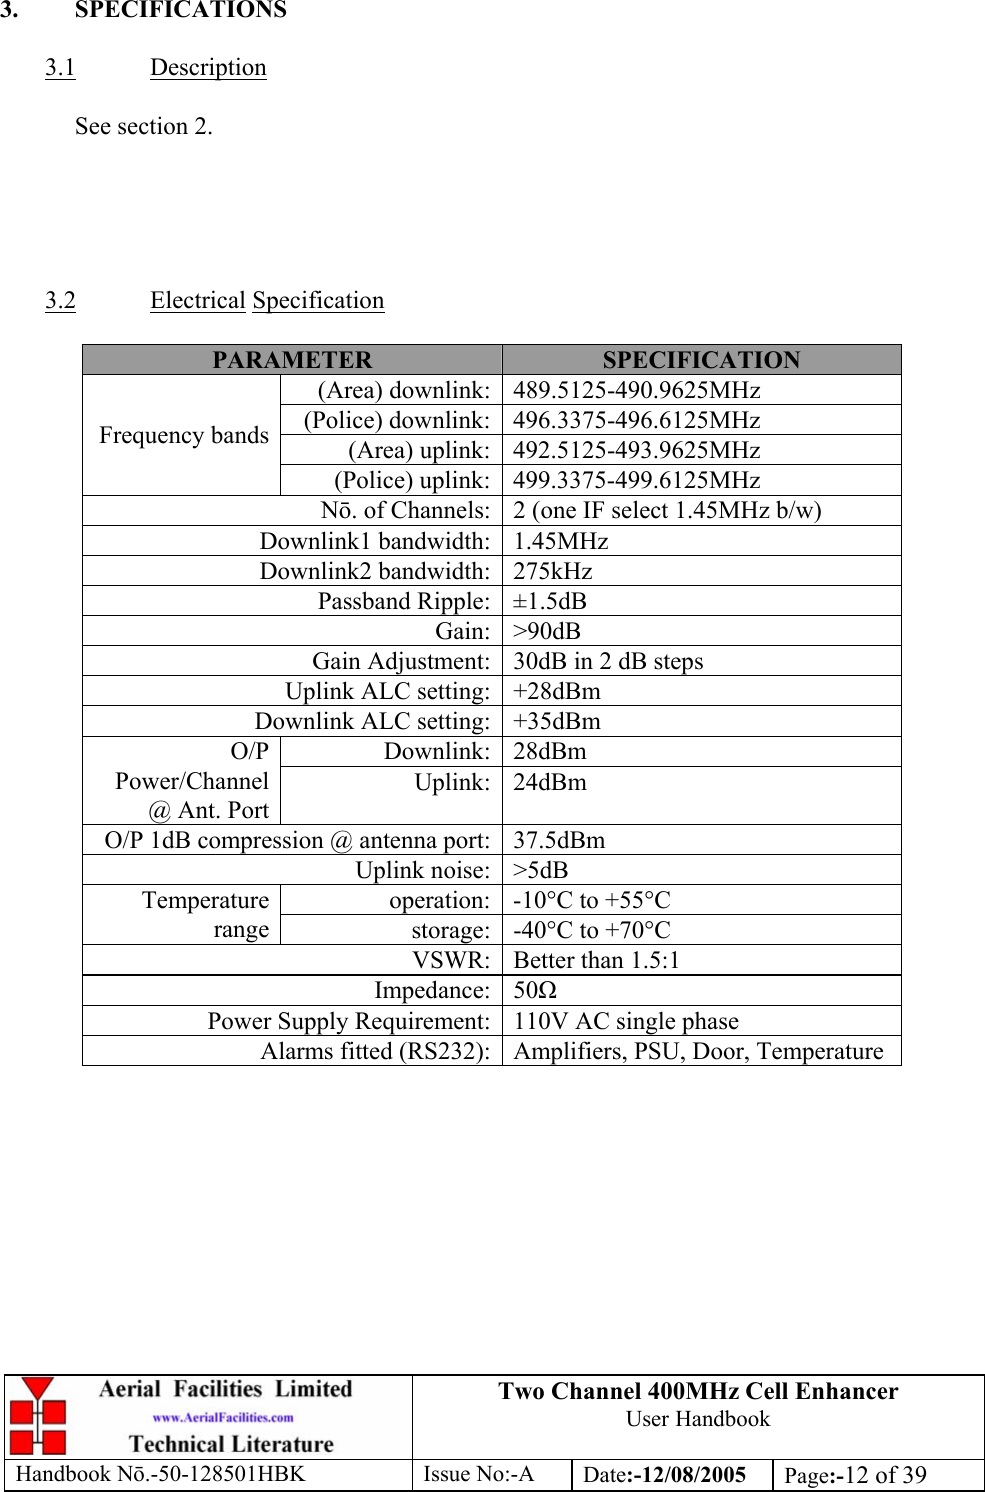 Two Channel 400MHz Cell Enhancer User Handbook Handbook N.-50-128501HBK Issue No:-A Date:-12/08/2005  Page:-12 of 39   3. SPECIFICATIONS  3.1 Description    See section 2.      3.2 Electrical Specification  PARAMETER  SPECIFICATION (Area) downlink: 489.5125-490.9625MHz (Police) downlink: 496.3375-496.6125MHz (Area) uplink: 492.5125-493.9625MHz Frequency bands (Police) uplink: 499.3375-499.6125MHz N. of Channels: 2 (one IF select 1.45MHz b/w) Downlink1 bandwidth: 1.45MHz Downlink2 bandwidth: 275kHz Passband Ripple: ±1.5dB Gain: &gt;90dB Gain Adjustment: 30dB in 2 dB steps Uplink ALC setting: +28dBm Downlink ALC setting: +35dBm Downlink: 28dBm O/P Power/Channel @ Ant. Port Uplink: 24dBm O/P 1dB compression @ antenna port: 37.5dBm Uplink noise: &gt;5dB operation: -10°C to +55°C Temperature range  storage: -40°C to +70°C VSWR: Better than 1.5:1 Impedance: 50 Power Supply Requirement: 110V AC single phase Alarms fitted (RS232): Amplifiers, PSU, Door, Temperature  